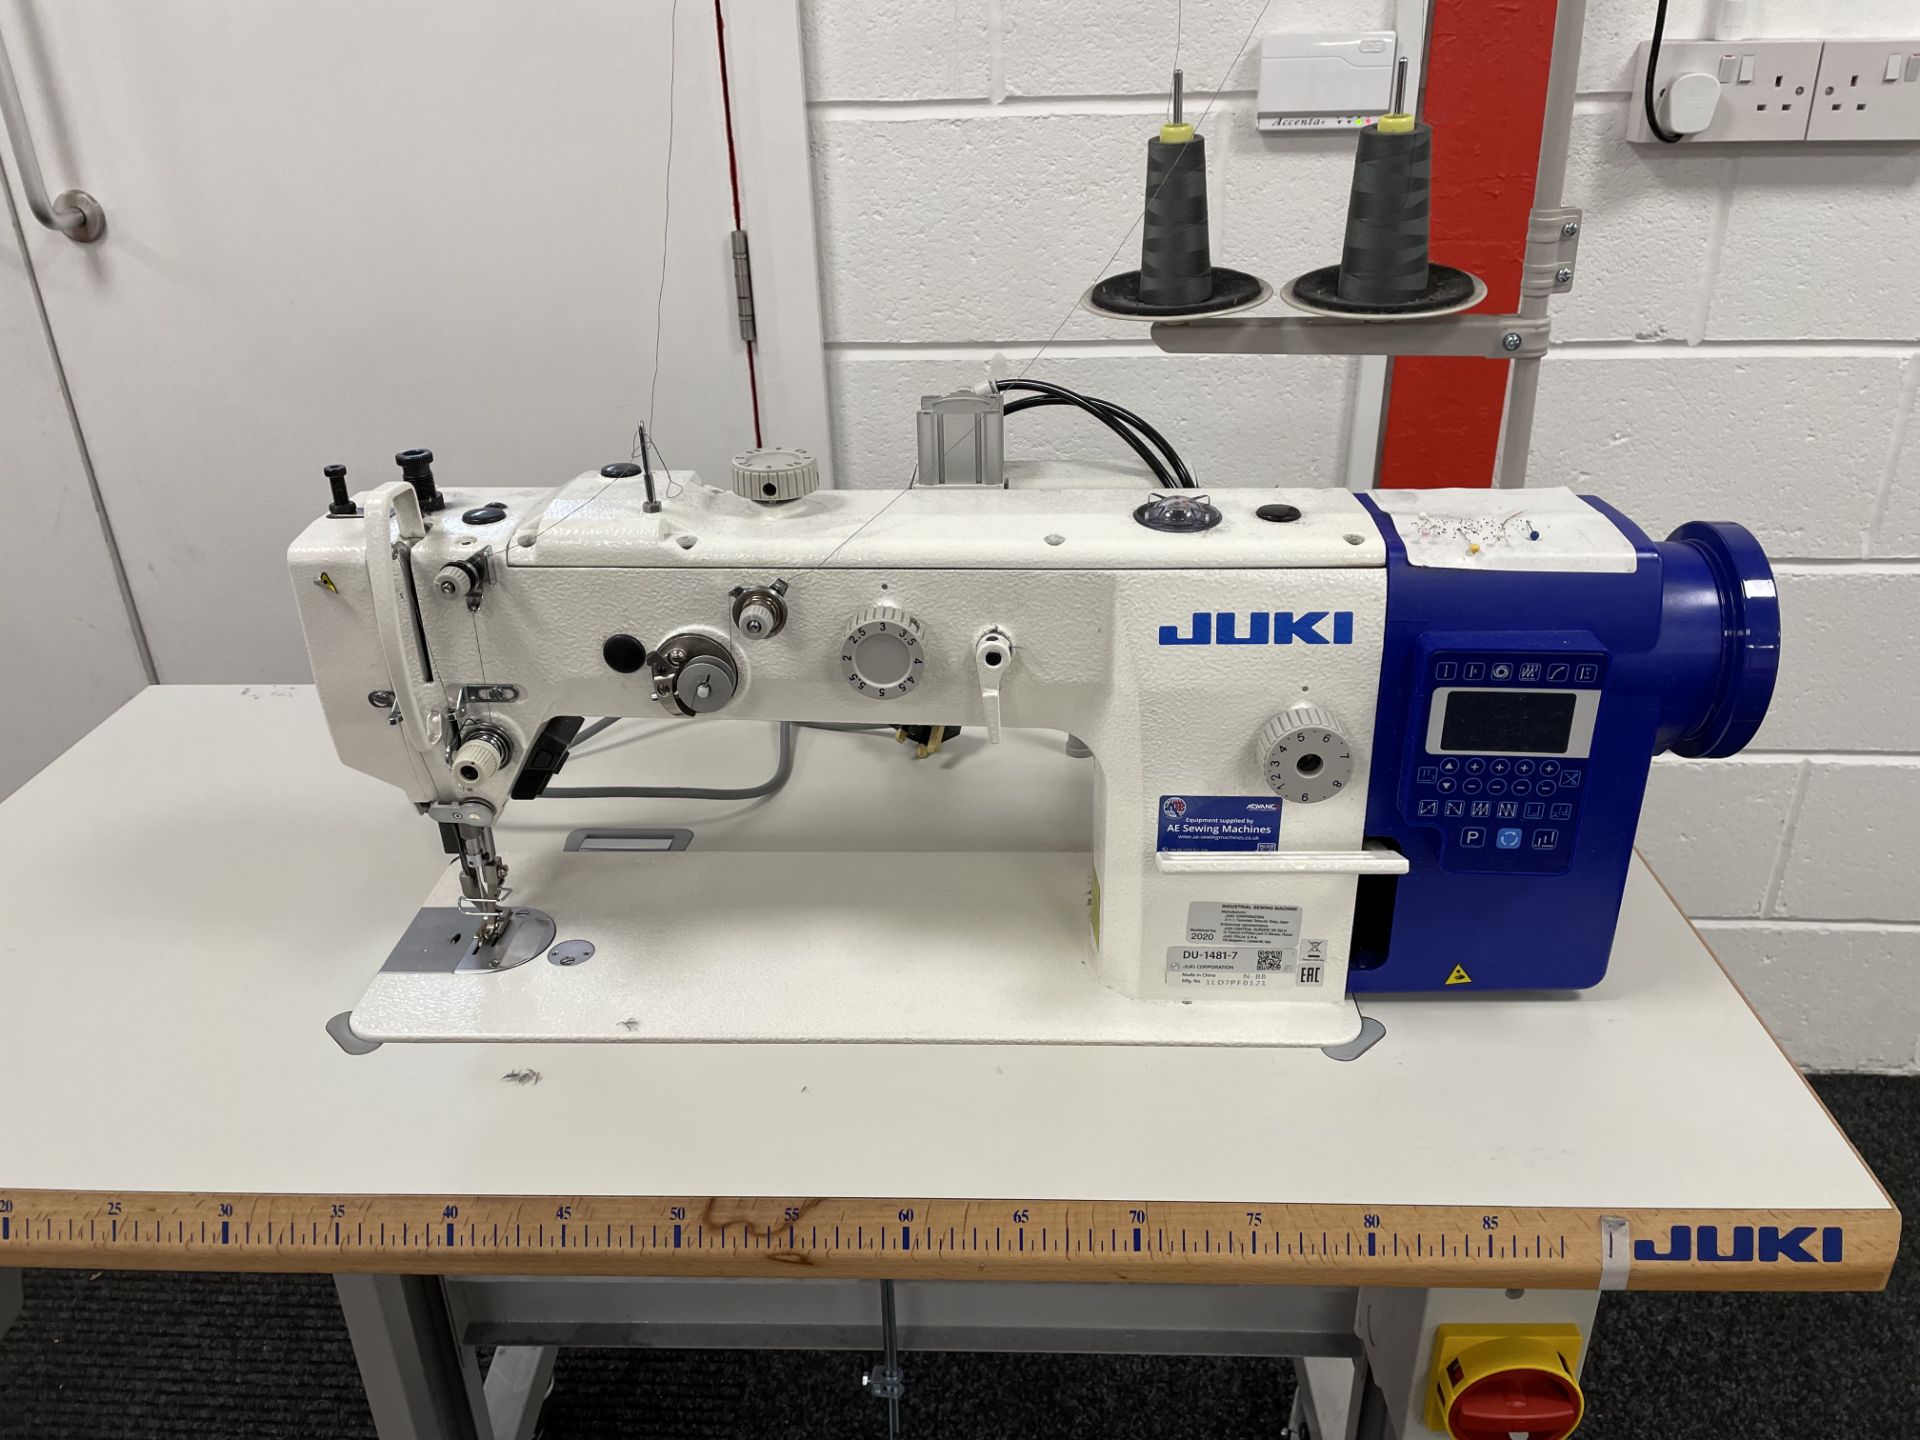 Juki DU-1481-7 1 Needle, Top & Bottom Feed Industrial Sewing Machine | YOM: 2020 | LOCATED IN MANCHE - Image 2 of 6